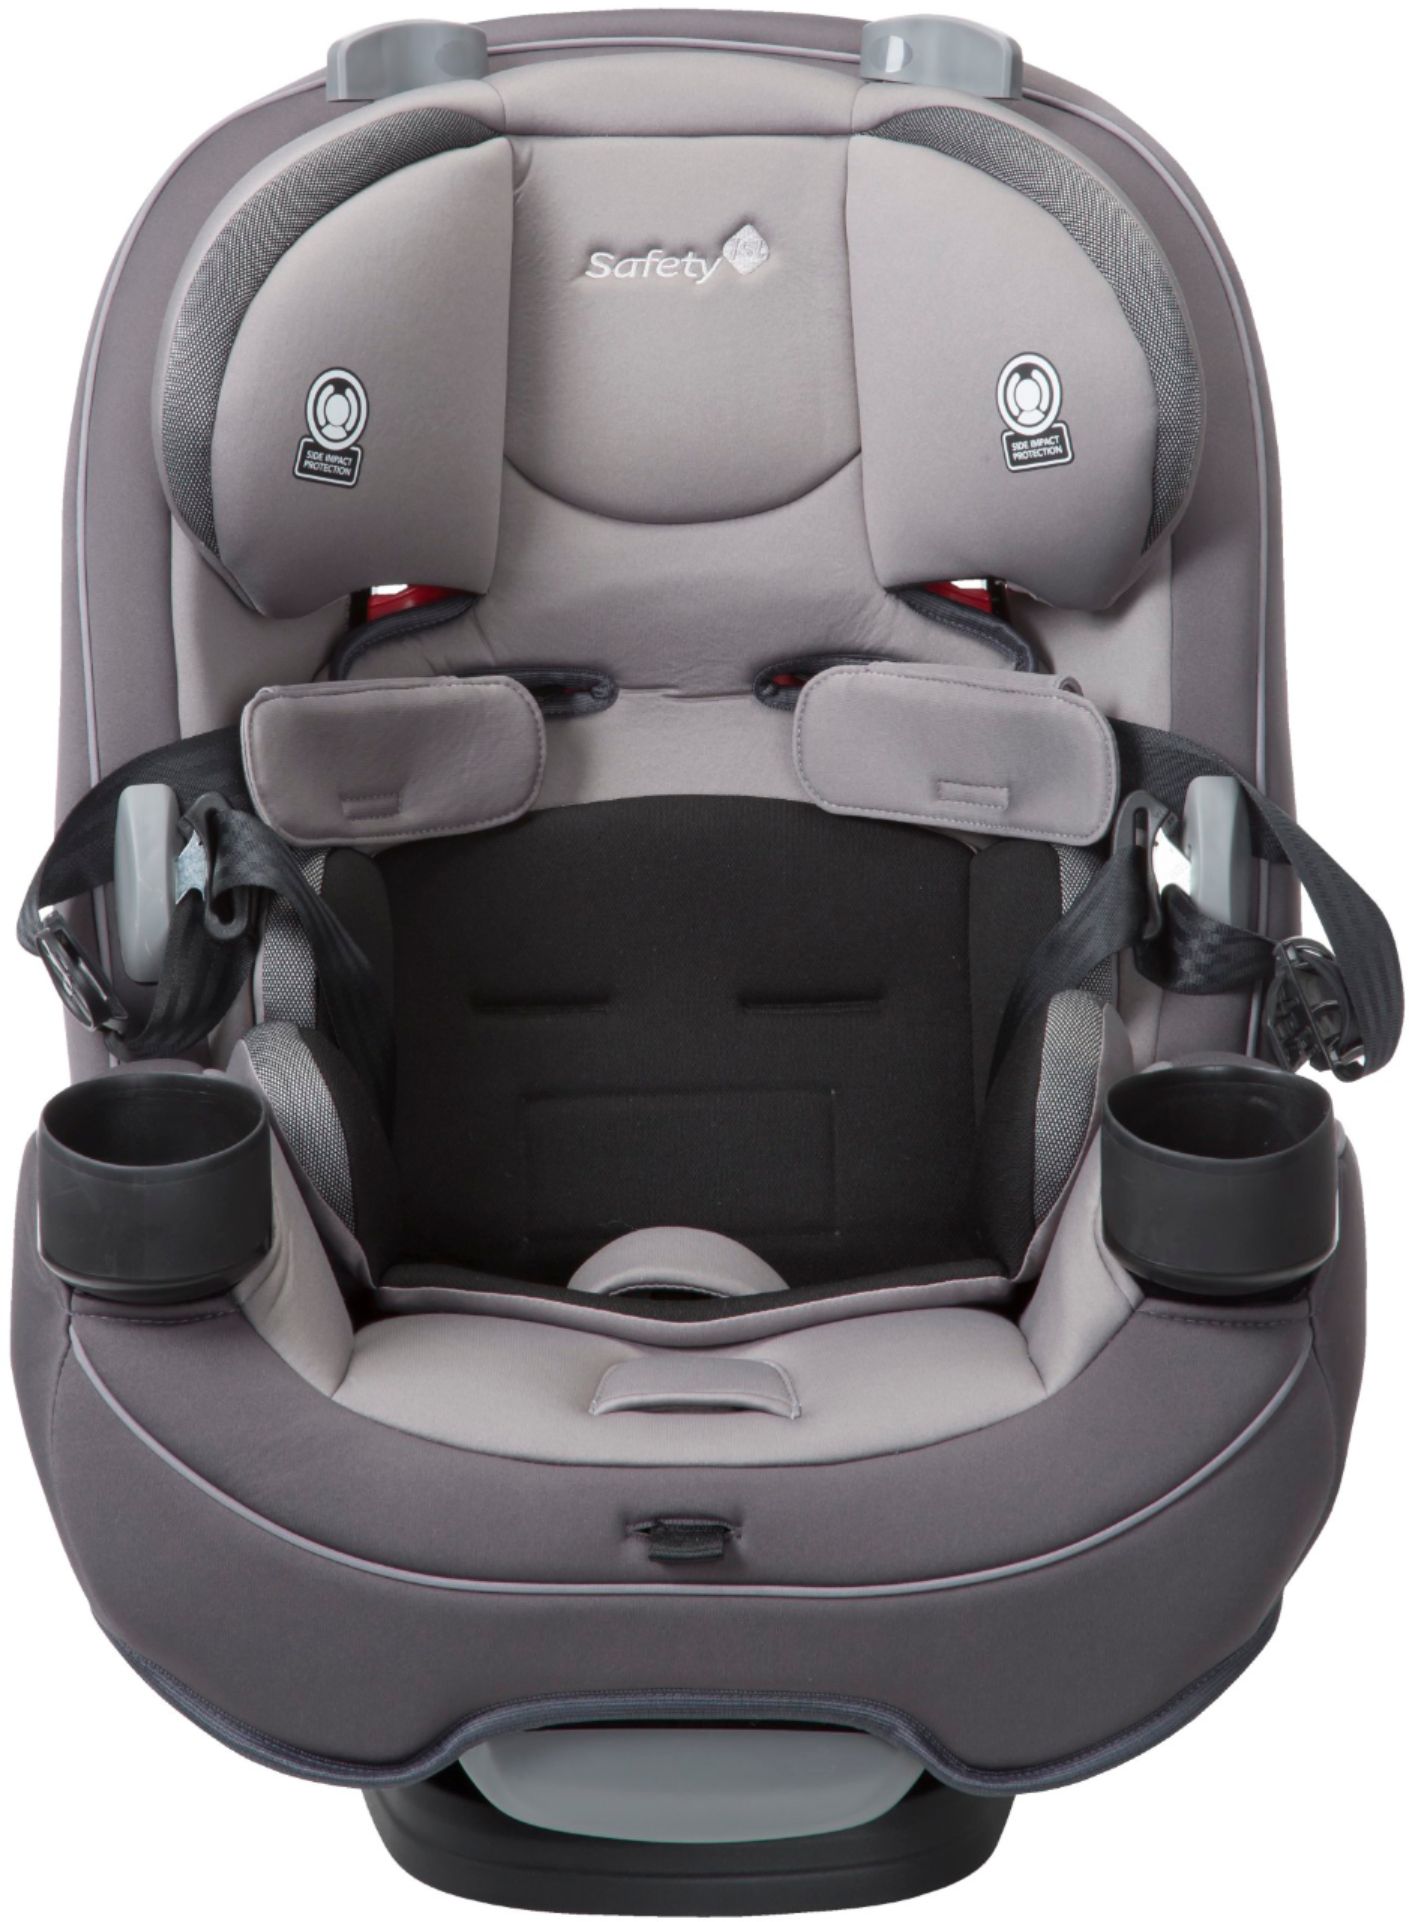 Safety 1st Grow and Go™ All-in-One Convertible Car Seat Grey